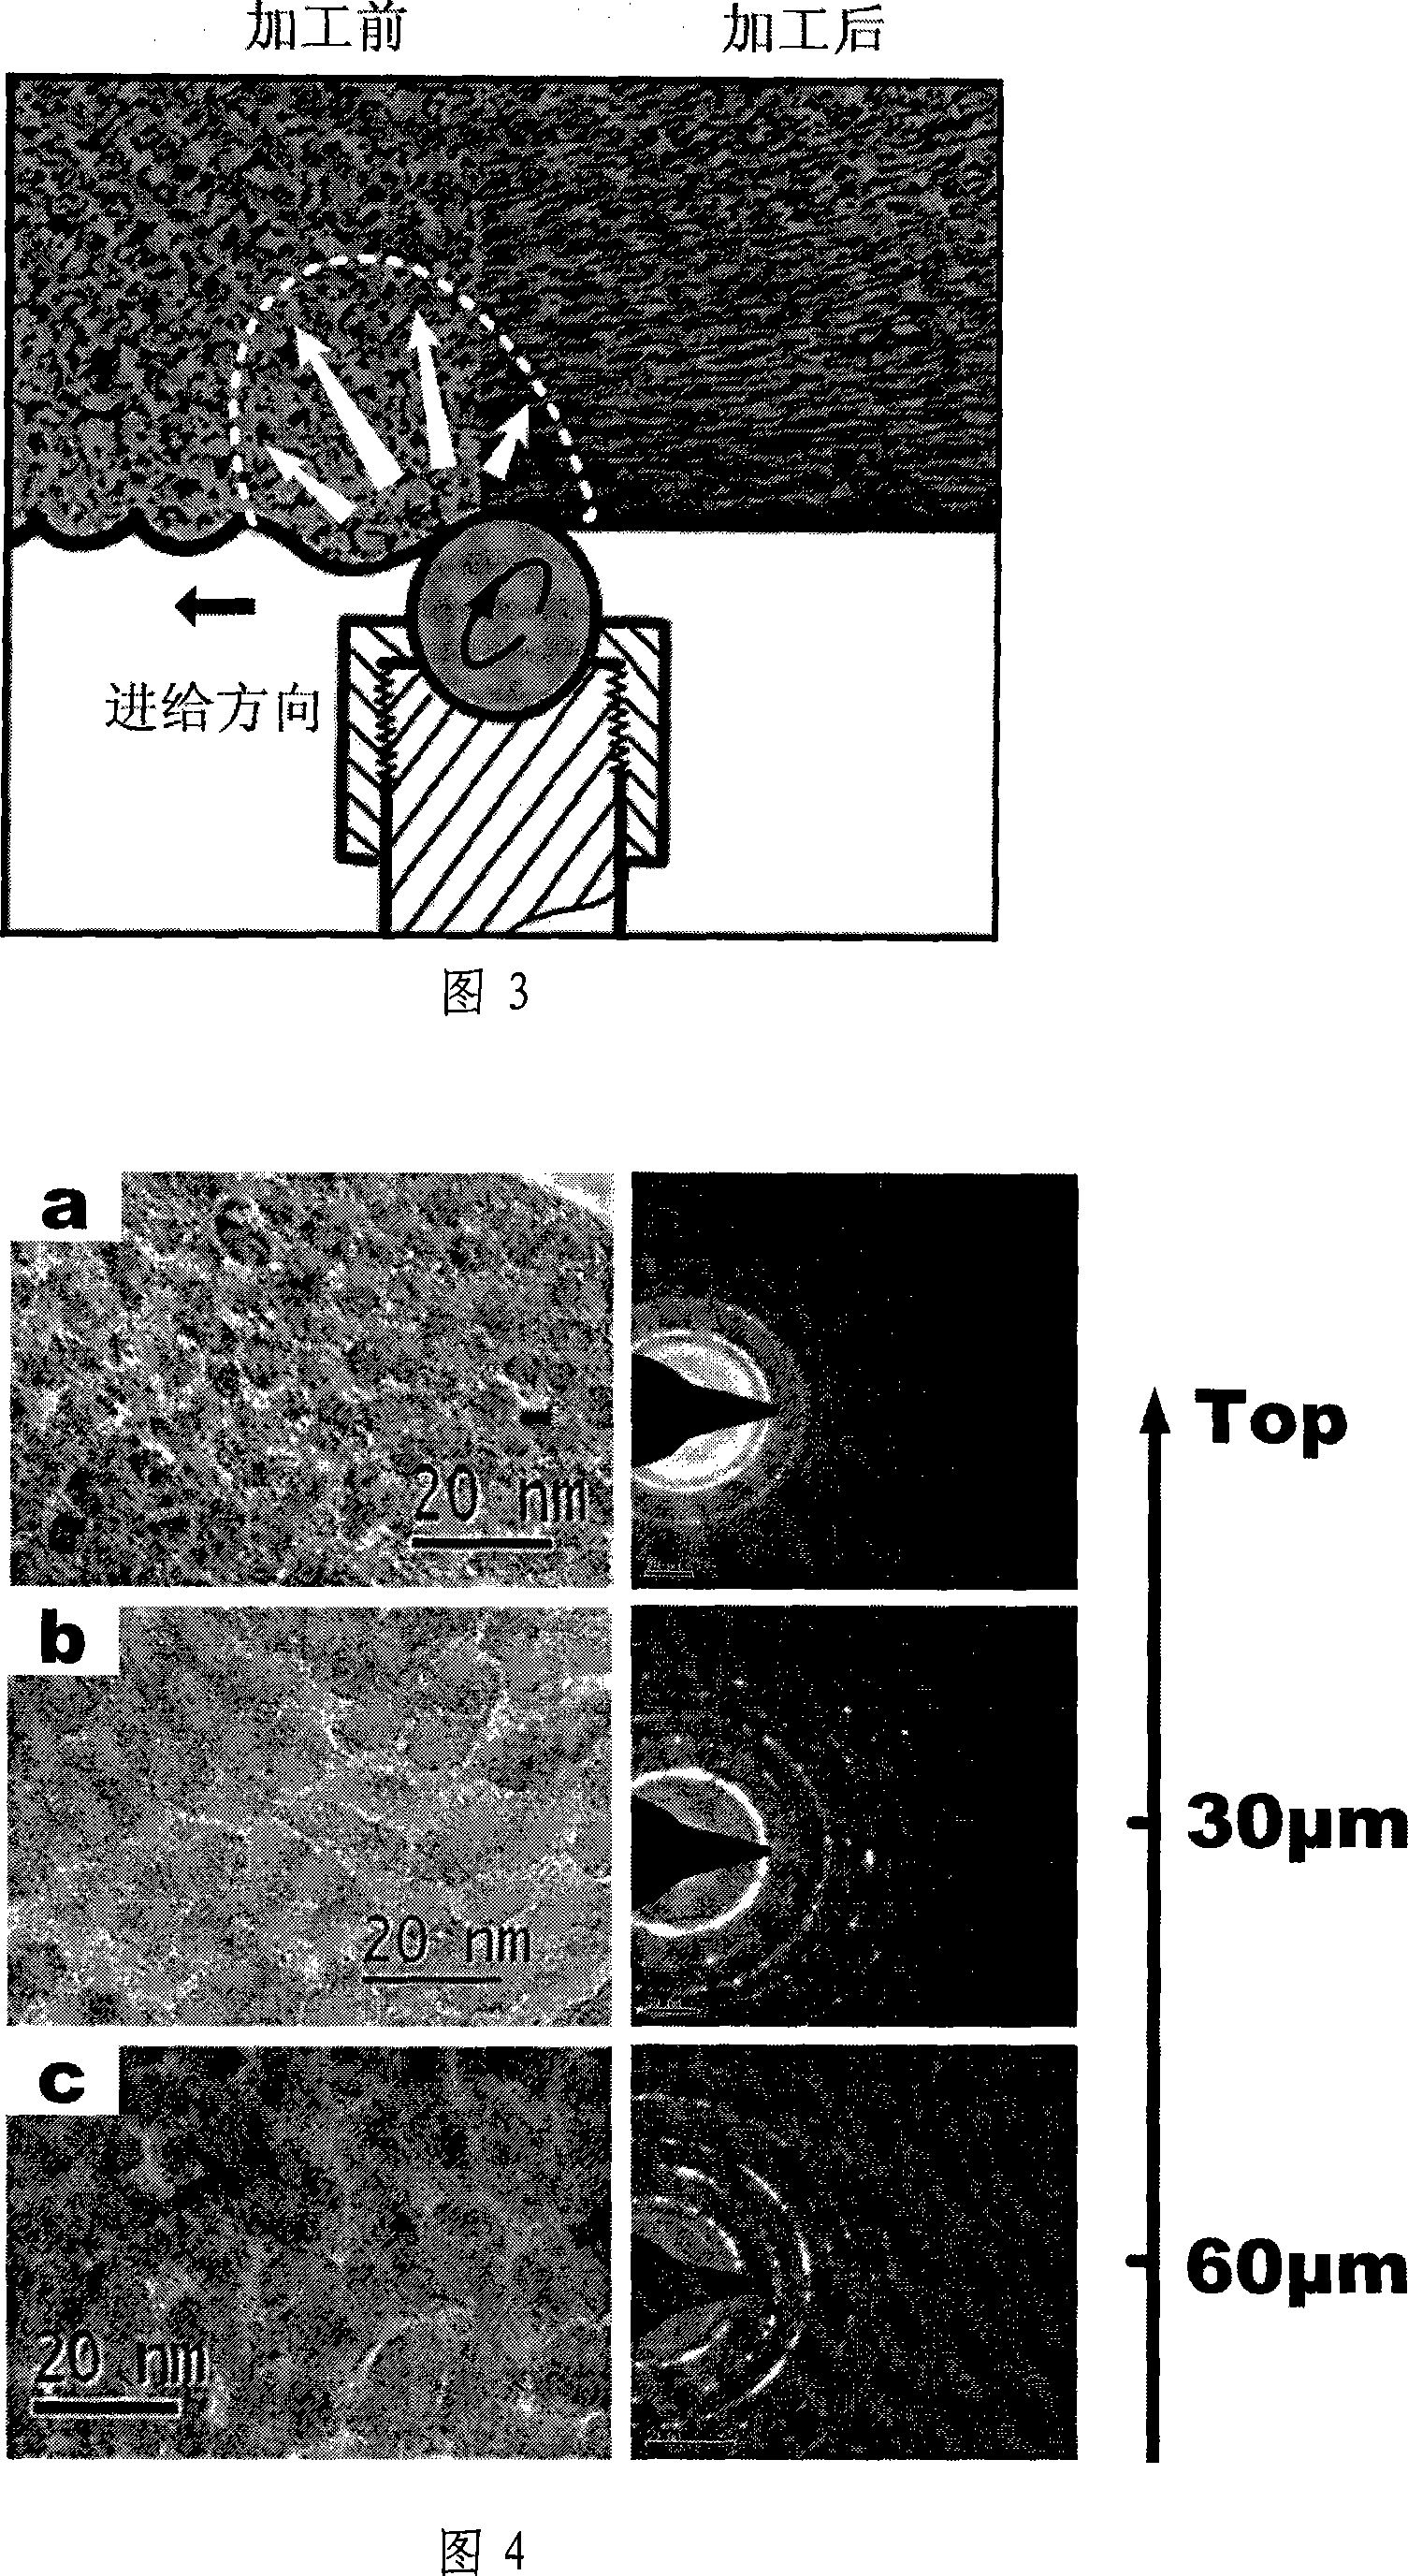 Ultrasonic surface rolling process nanoparticlization method and apparatus